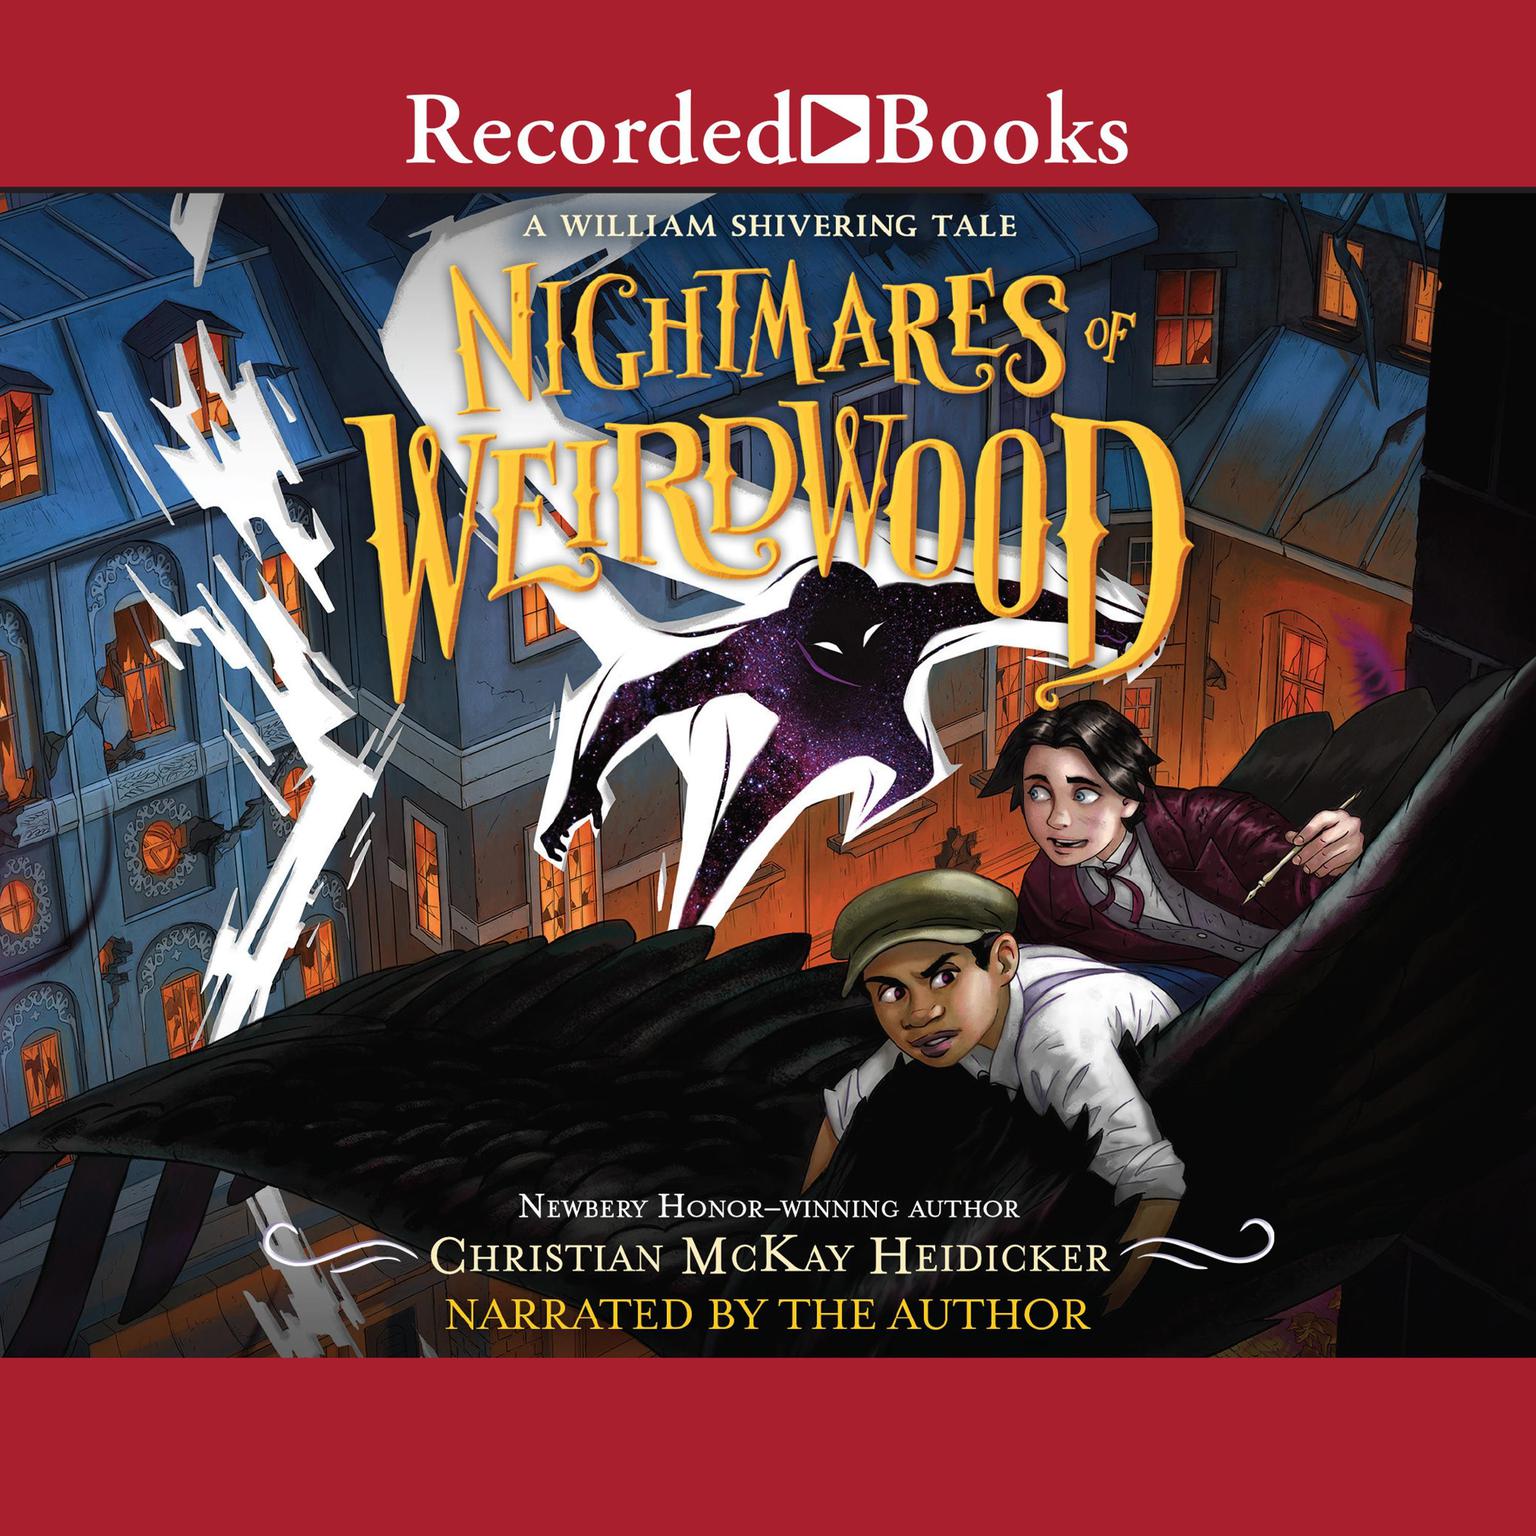 Nightmares of Weirdwood: A William Shivering Tale Audiobook, by Christian McKay Heidicker